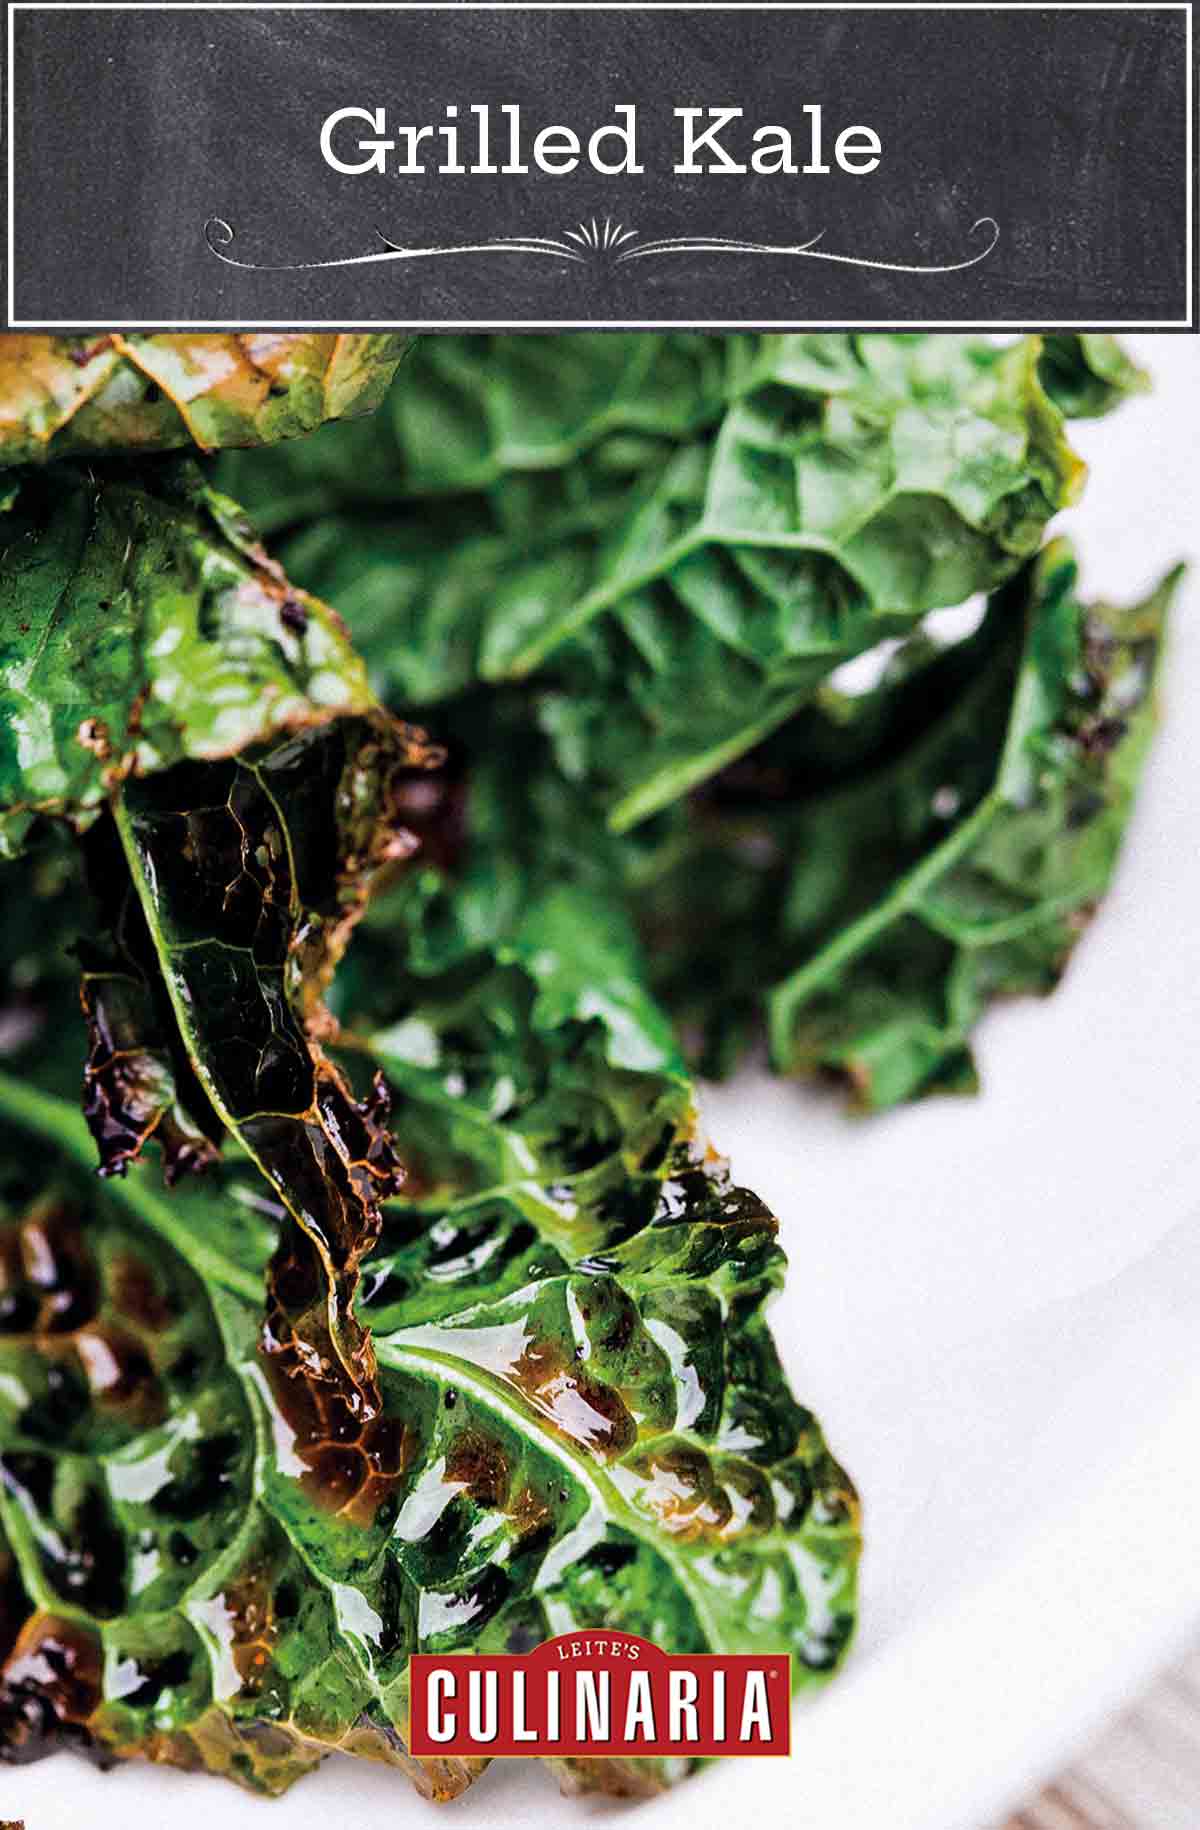 A few pieces of grilled kale stacked on a white plate.